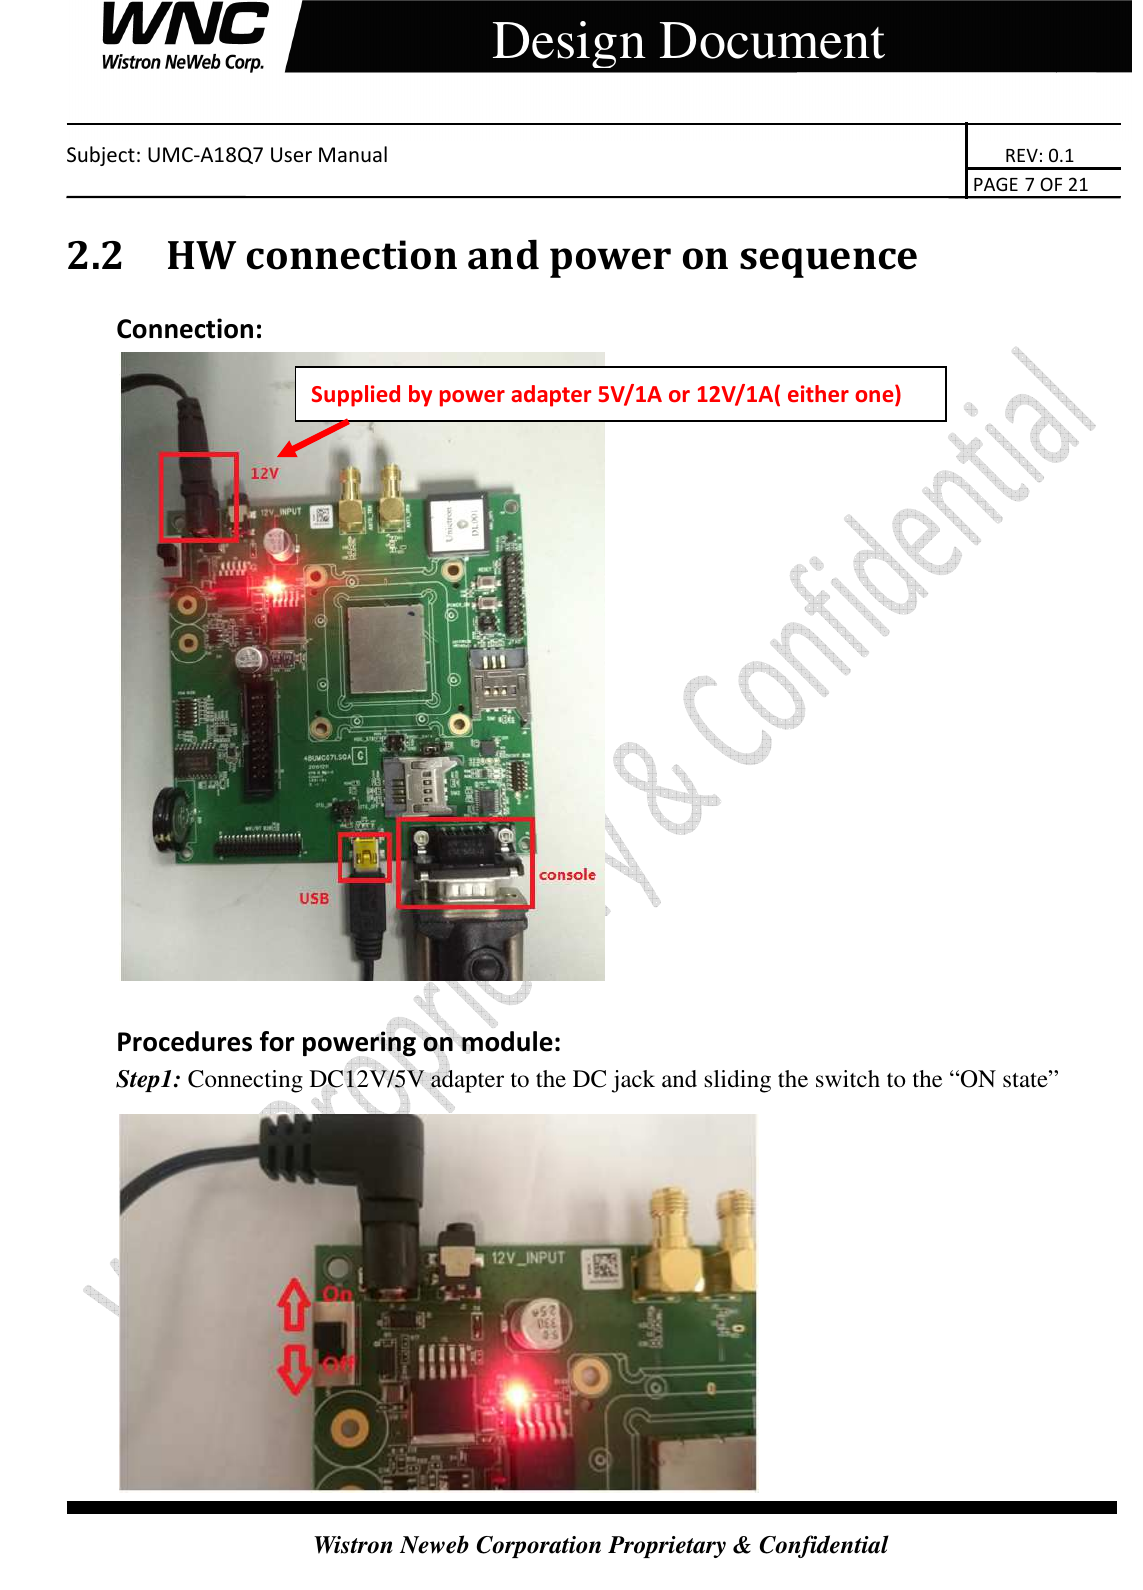    Subject: UMC-A18Q7 User Manual                                                                       REV: 0.1                                                                                                                                                                               PAGE 7 OF 21  Wistron Neweb Corporation Proprietary &amp; Confidential     Design Document 2.2 HW connection and power on sequence Connection:   Procedures for powering on module: Step1: Connecting DC12V/5V adapter to the DC jack and sliding the switch to the “ON state”  Supplied by power adapter 5V/1A or 12V/1A( either one) 